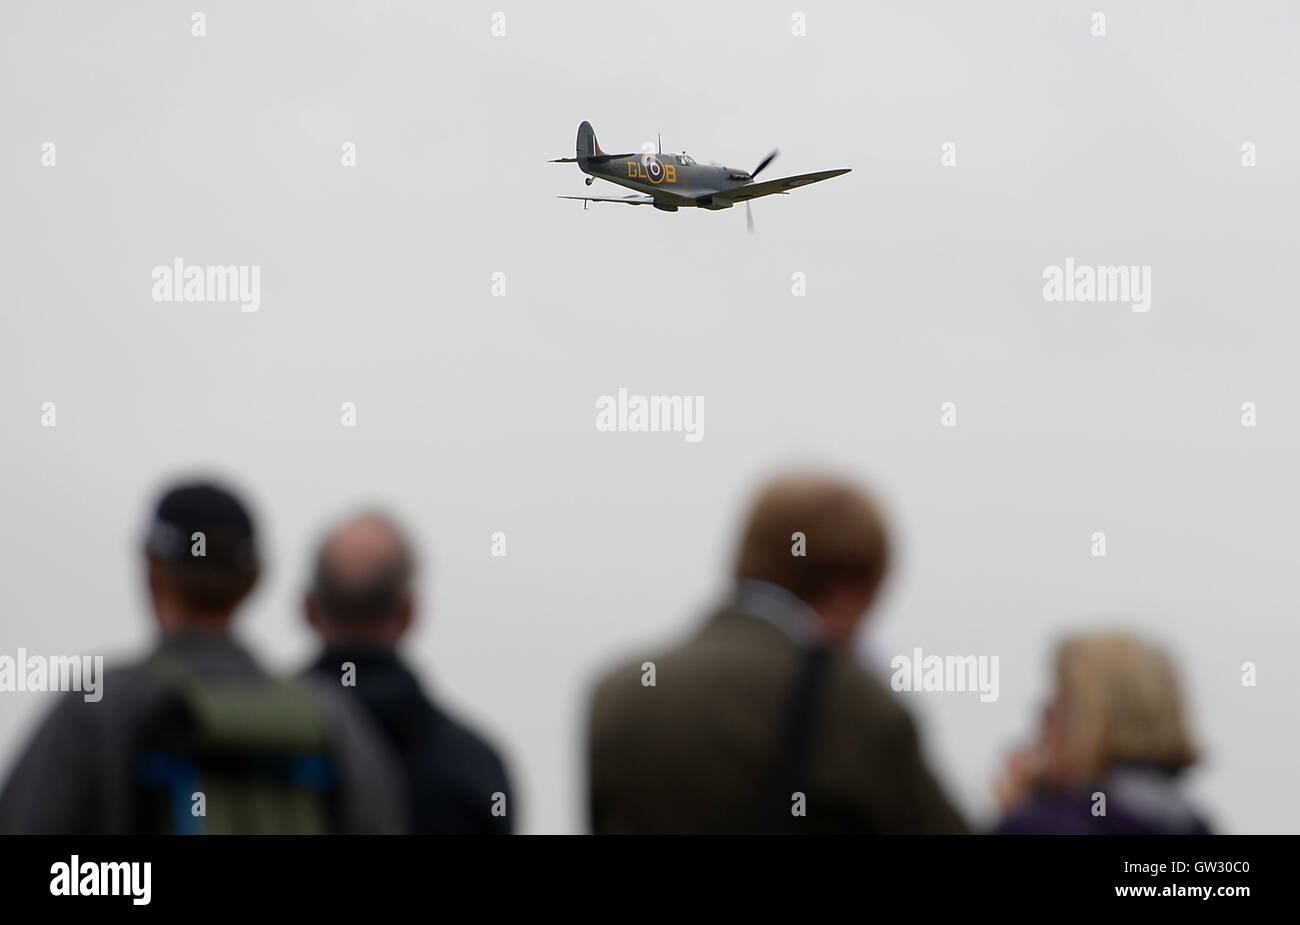 A Supermarine Spitfire Mk1a flies over the crowd during The Duxford Air Show 2016 at The Imperial War Museum in Duxford, Cambridgeshire. Stock Photo